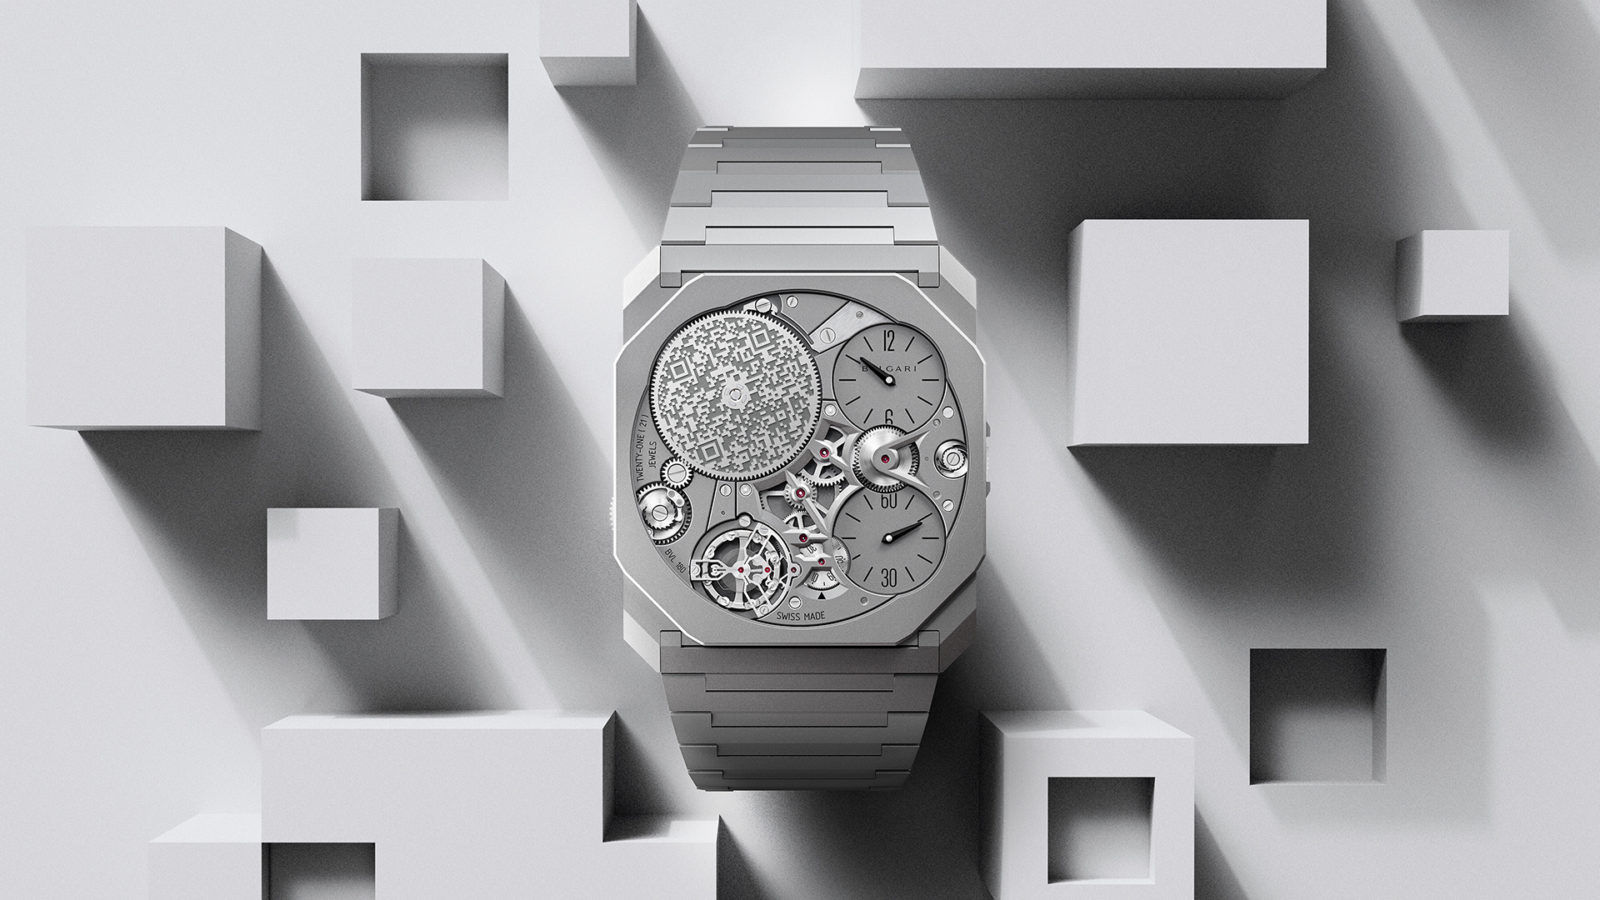 Bulgari launches the world’s thinnest watch with the Octo Finissimo Ultra Watch